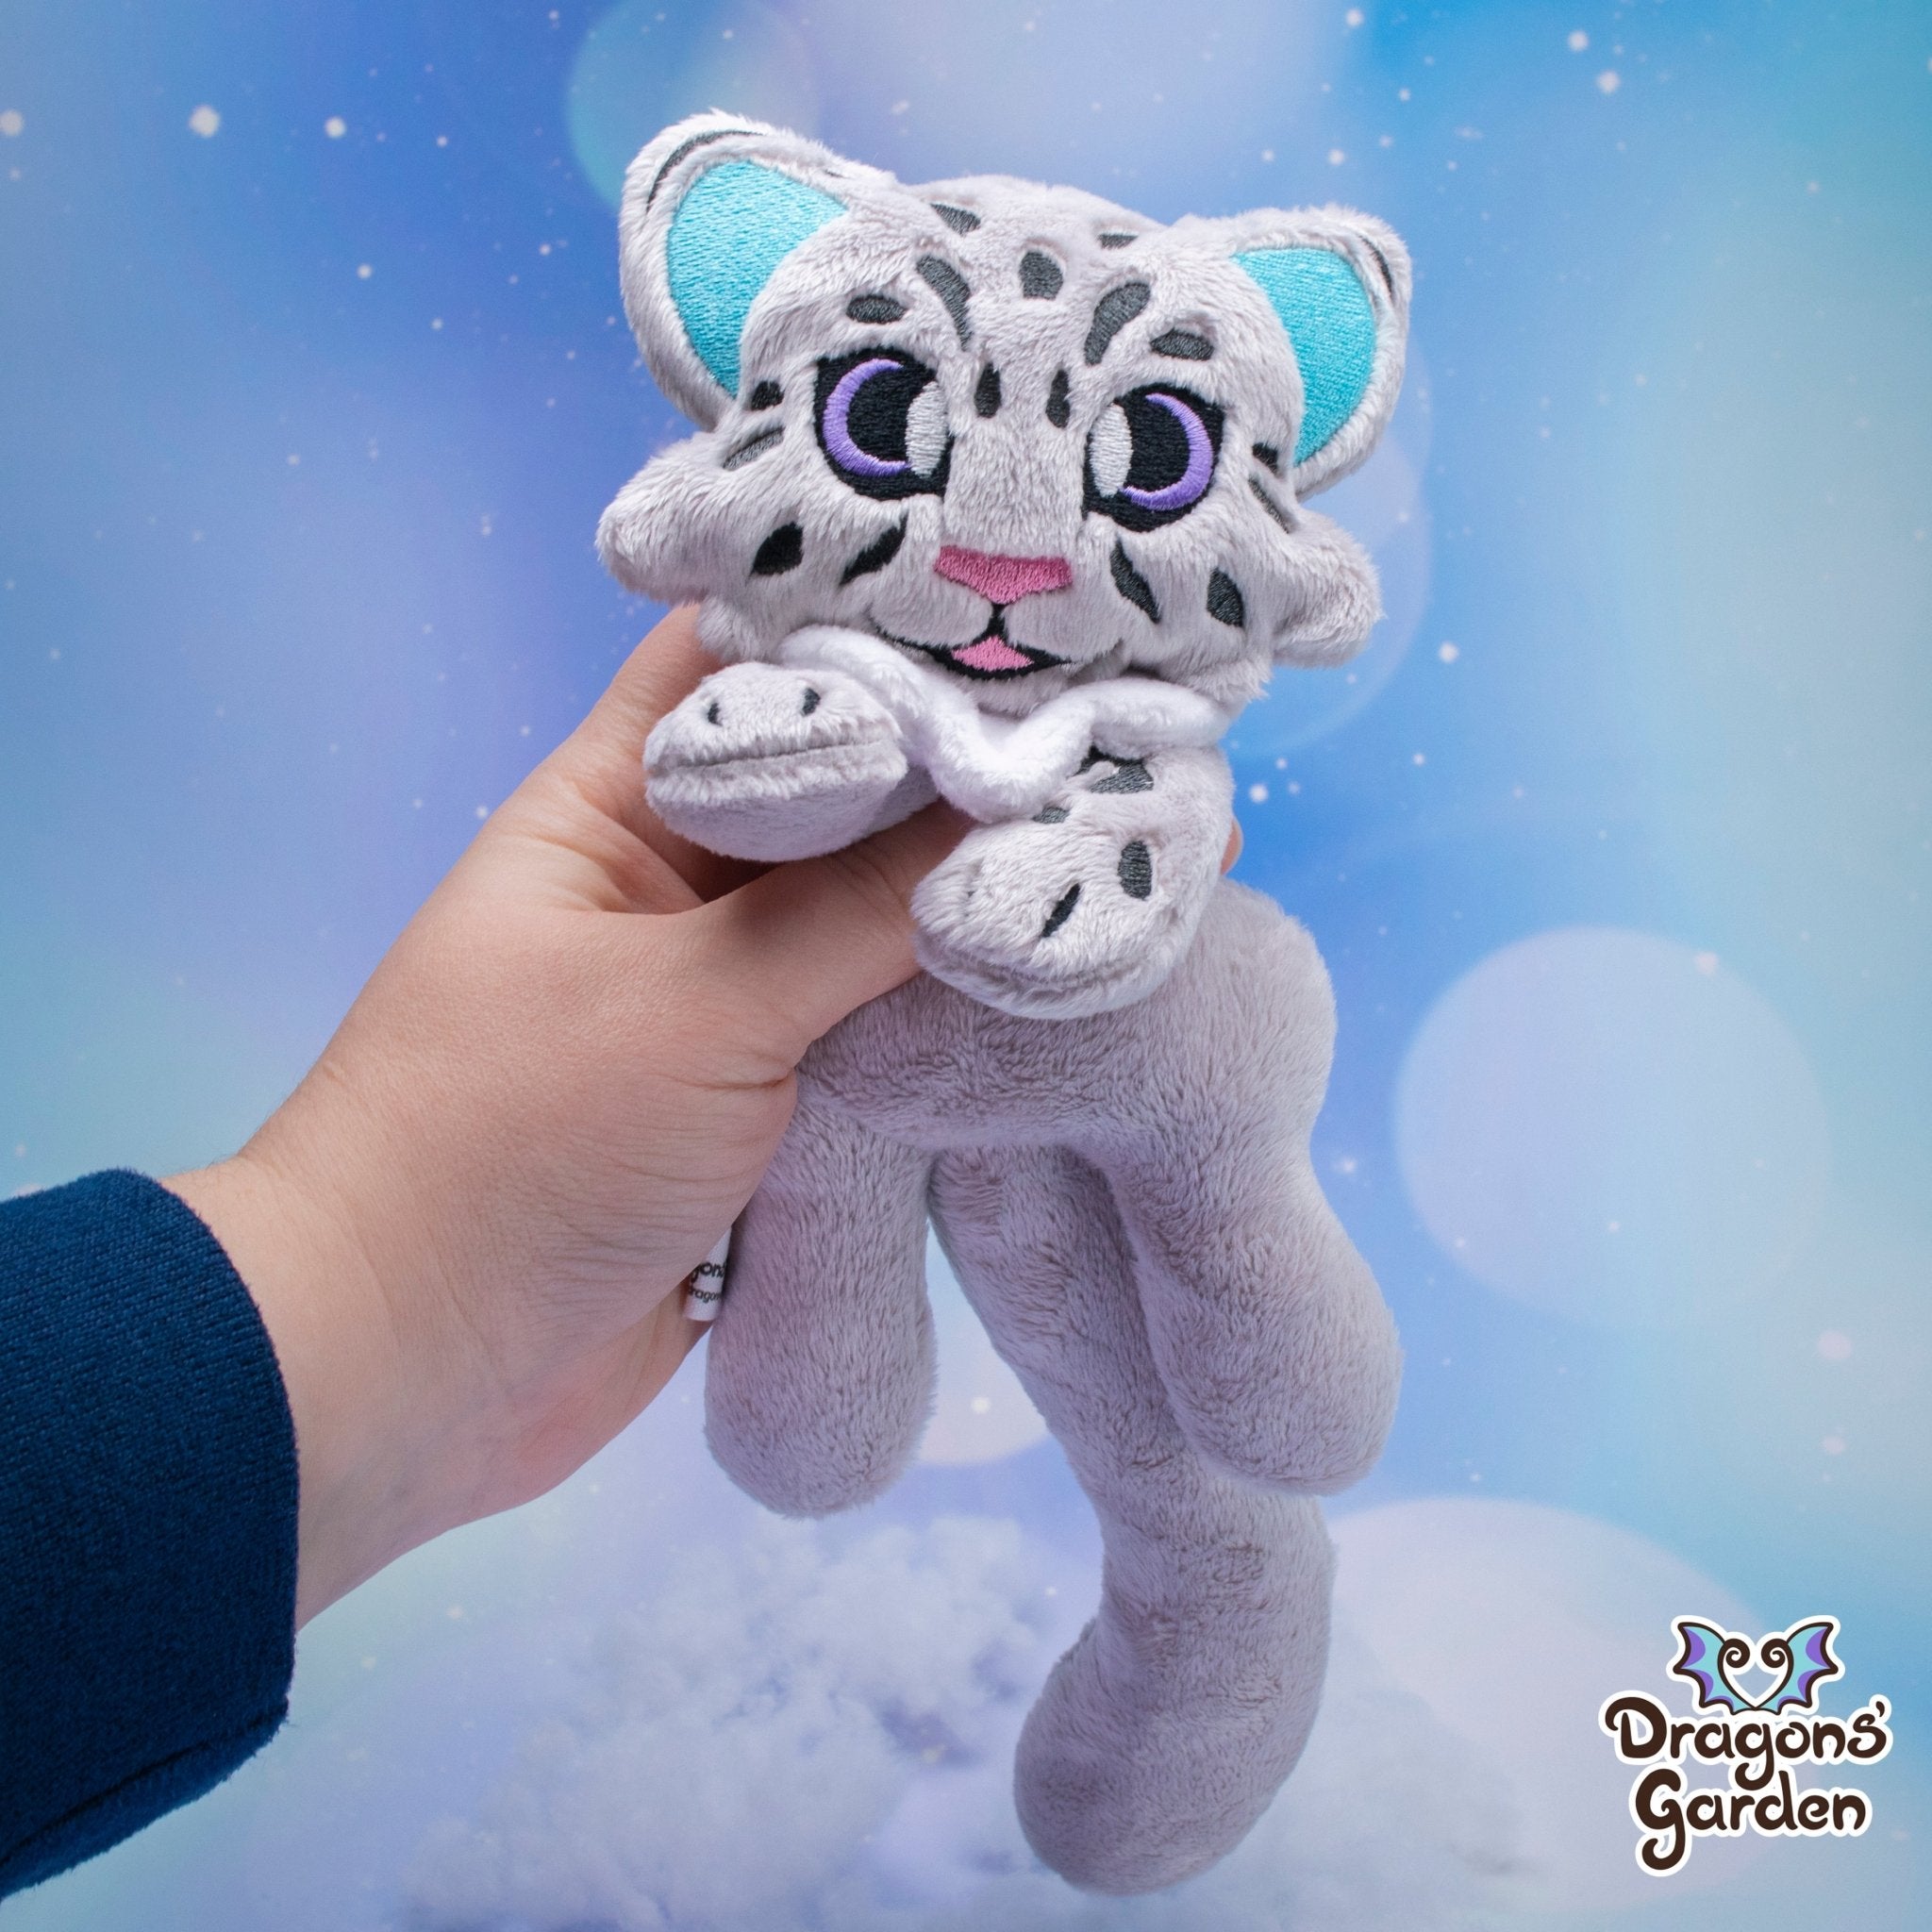 ITH Snow Leopard Plush Embroidery Pattern - Dragons' Garden